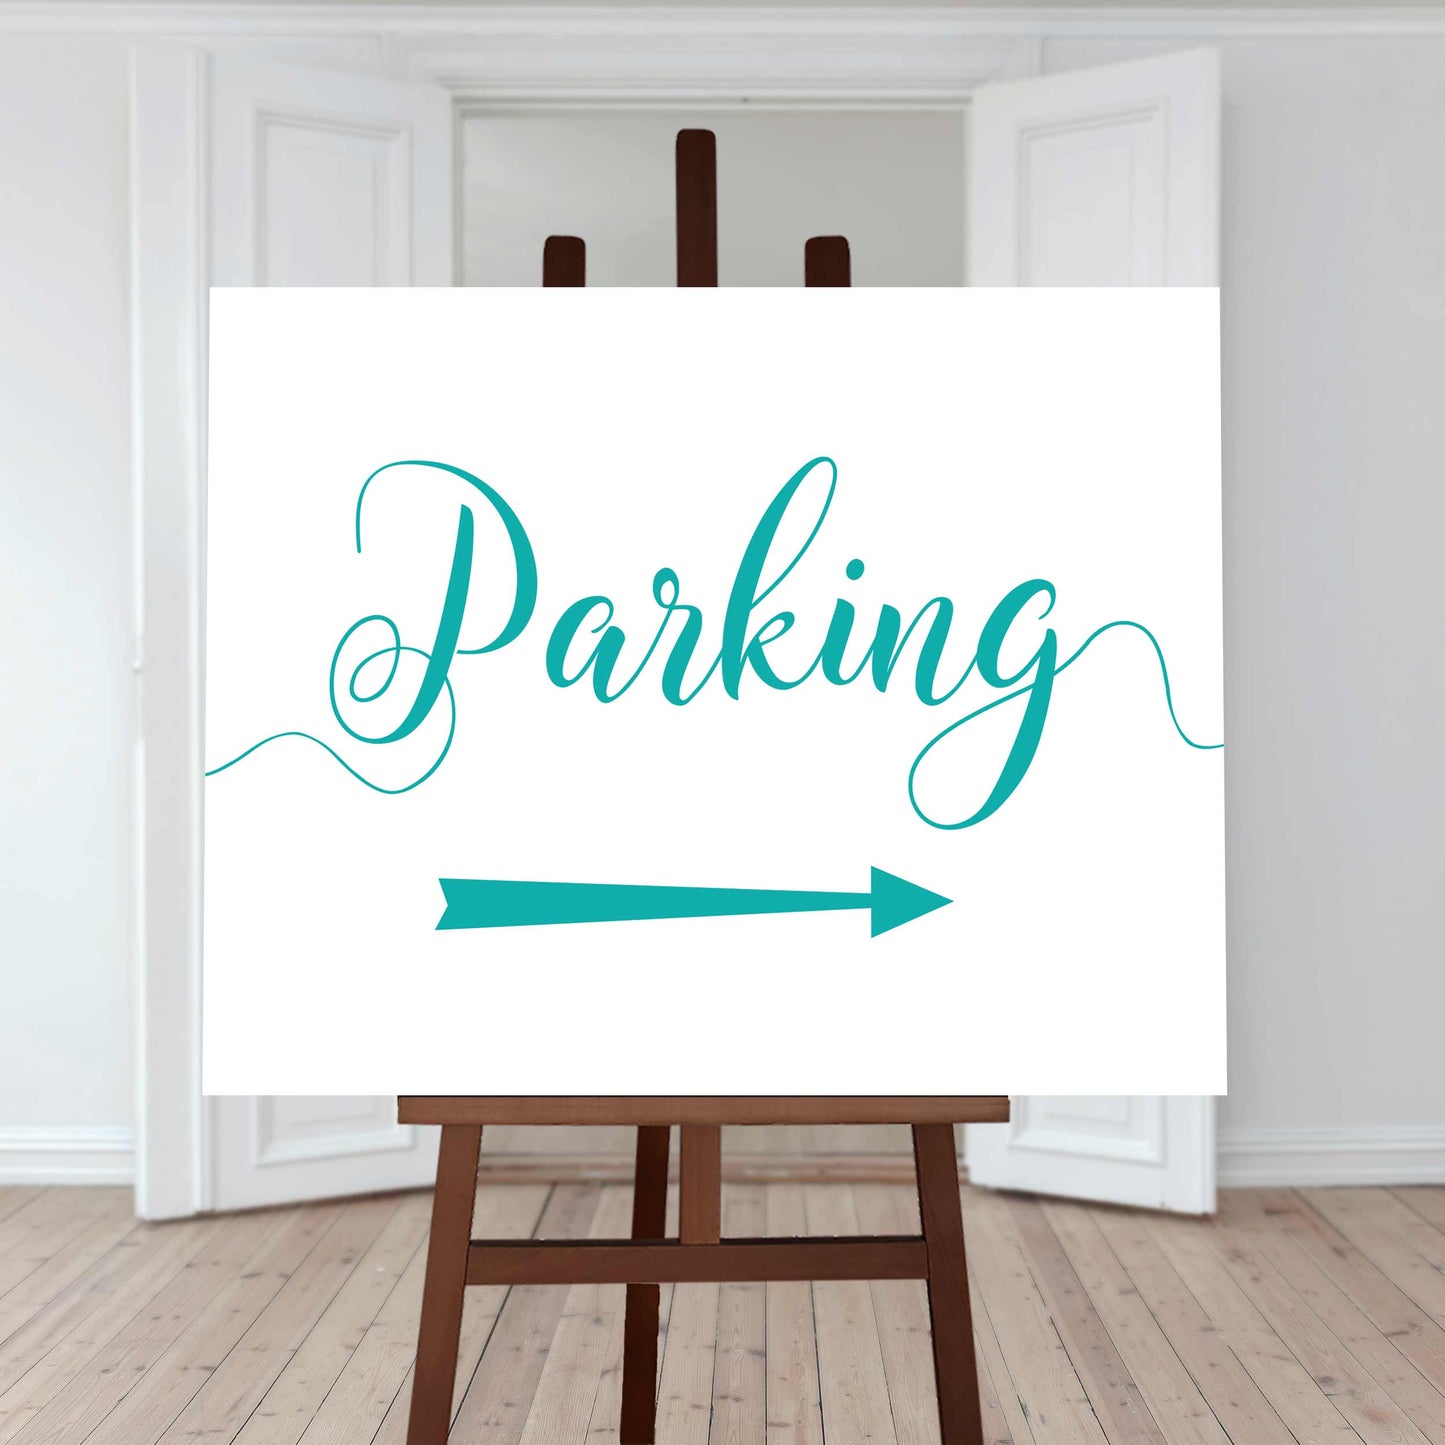 turquoise wedding car park directions sign with an arrow pointing right